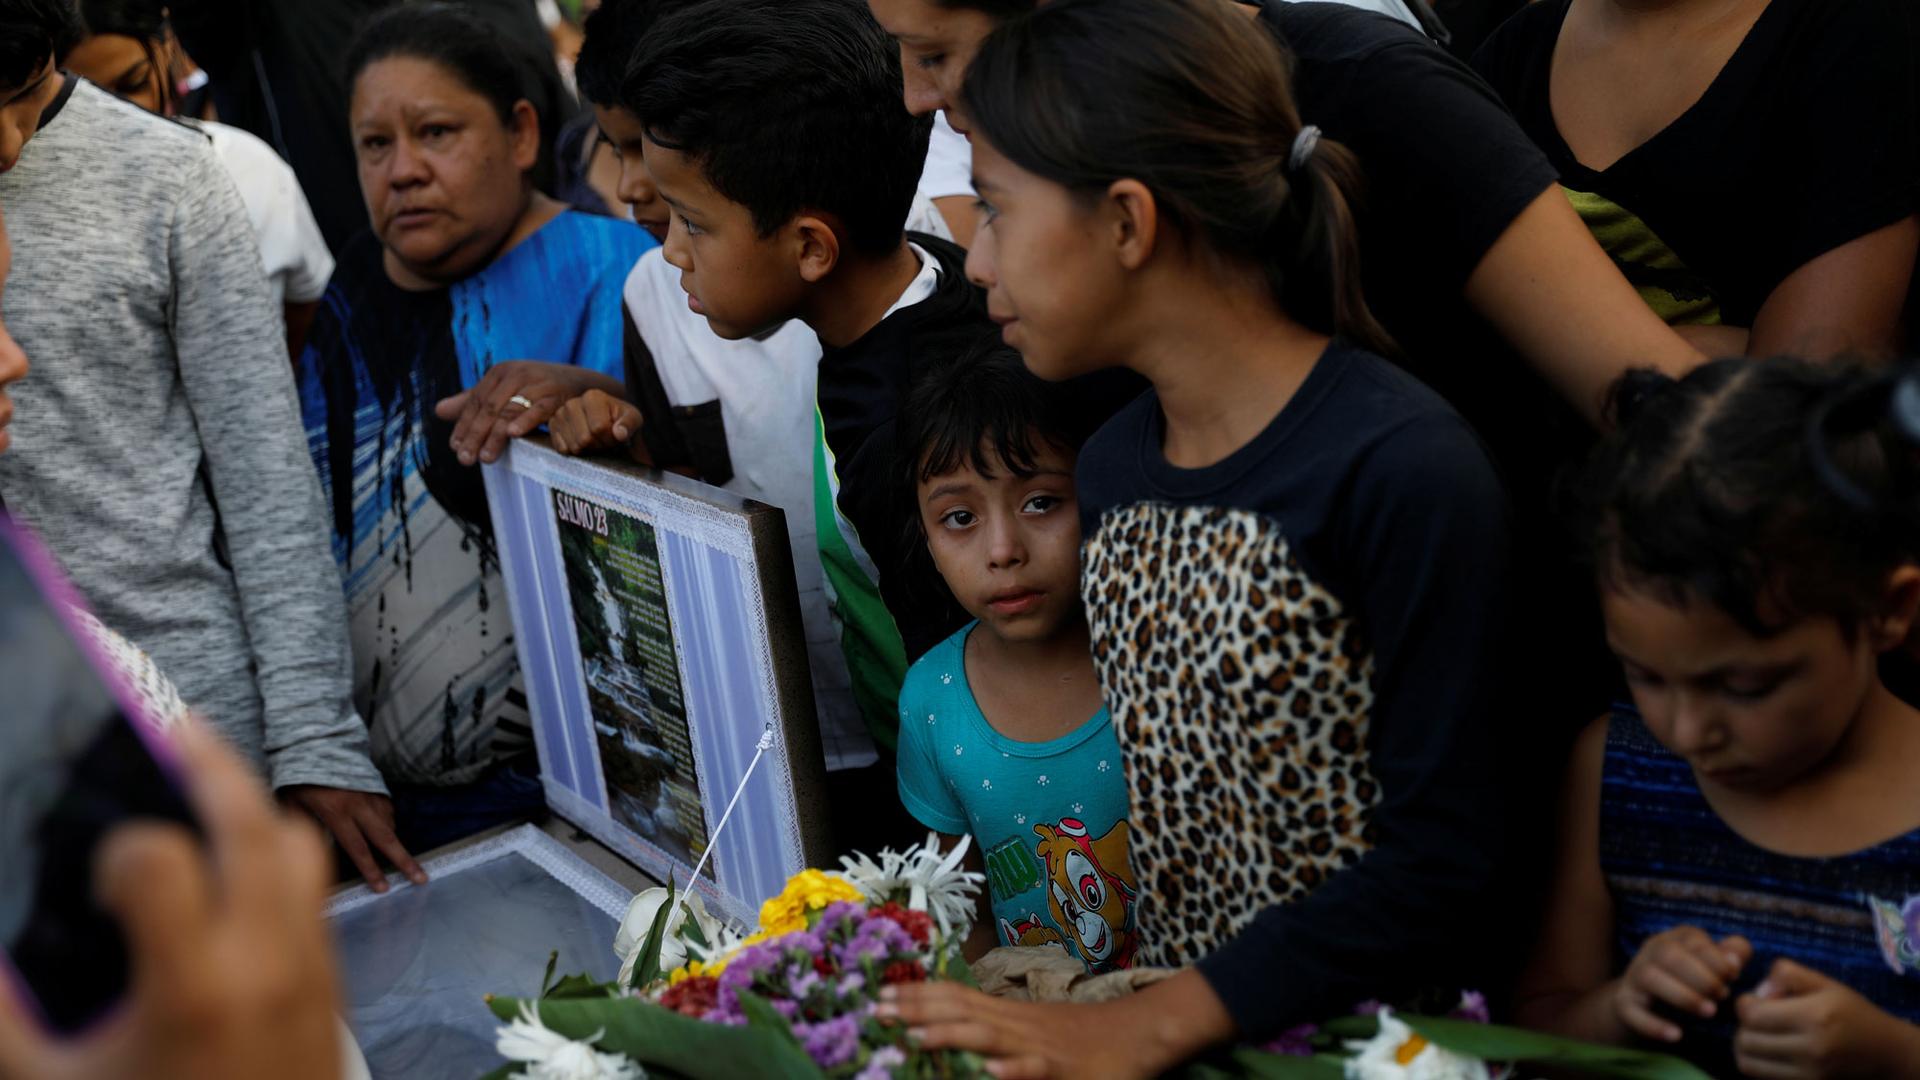 People crowd next to the coffin with a young person in a blue shirt with a tear in their eye, during her funeral, in Tegucigalpa, Honduras in July.